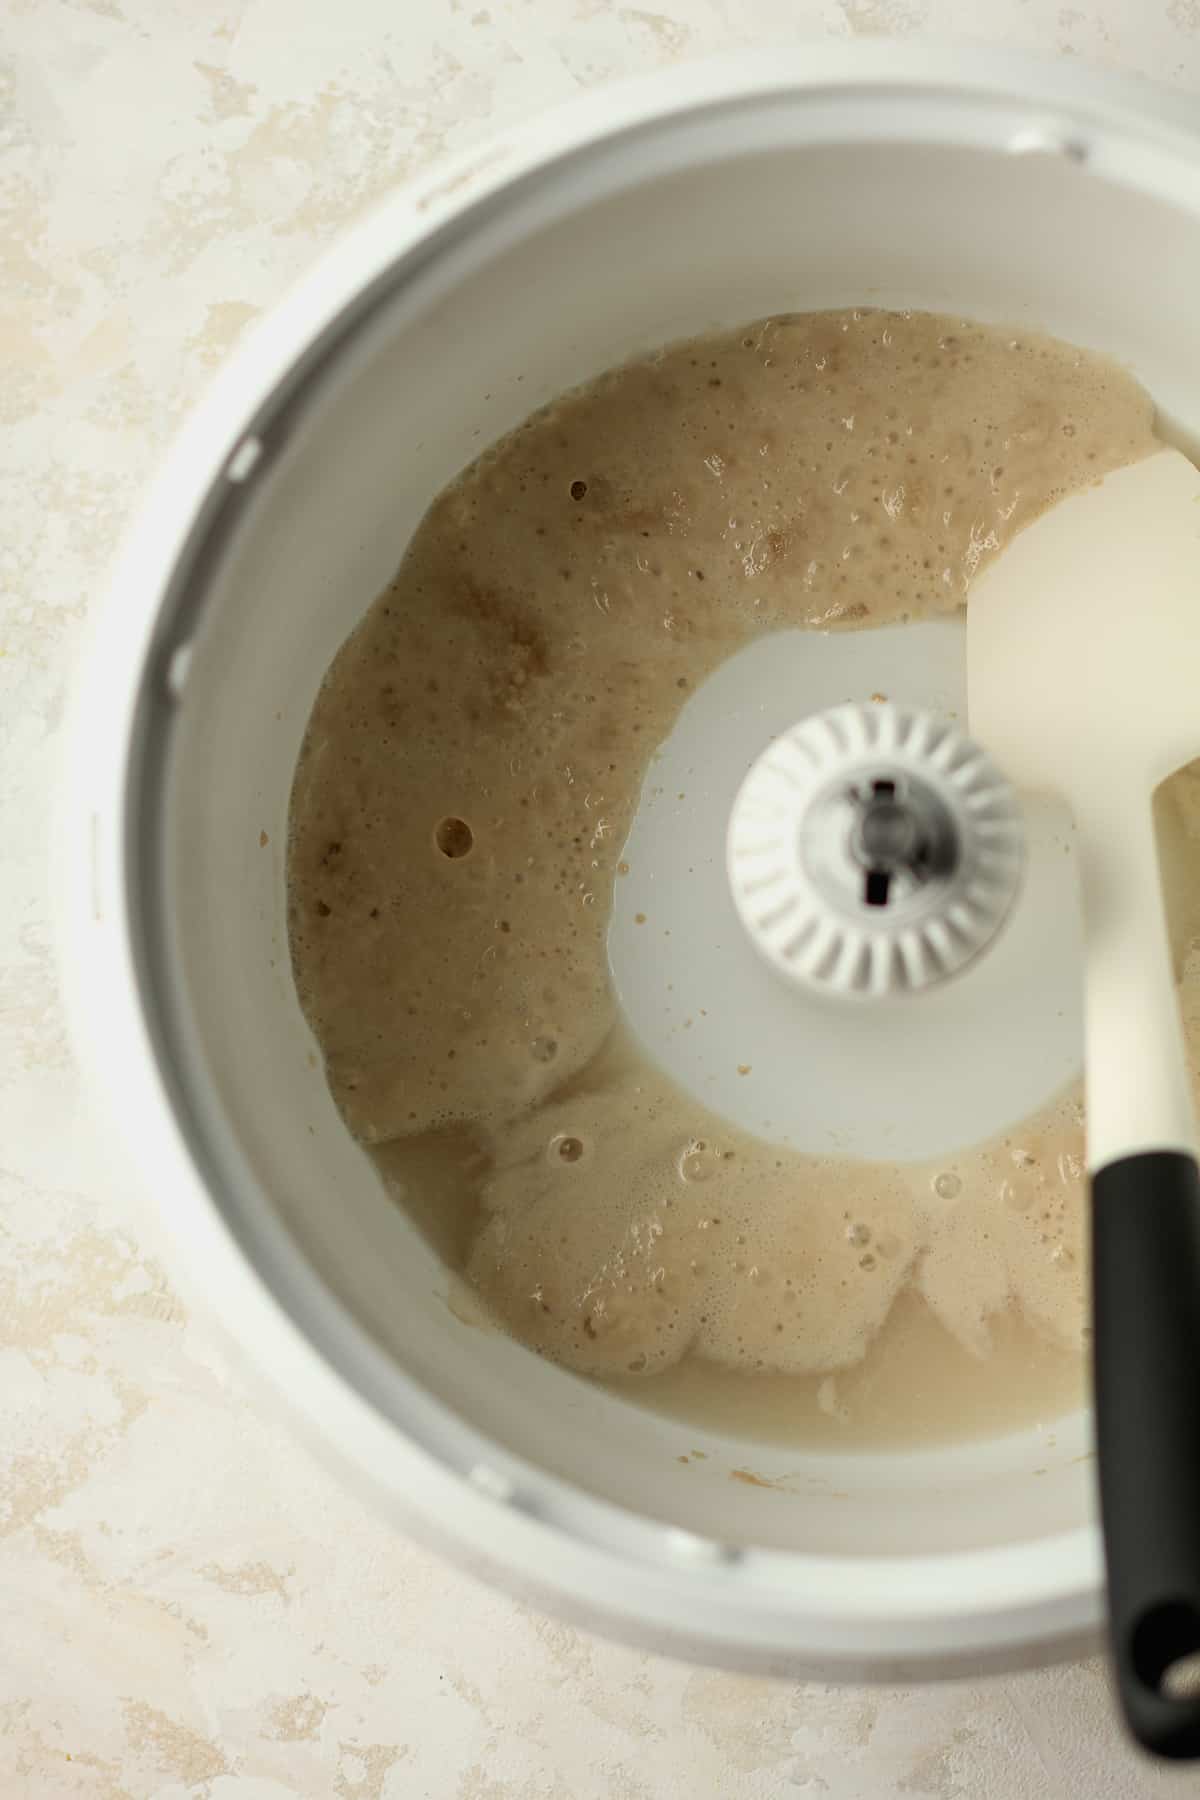 The bubbly yeast in a mixer.